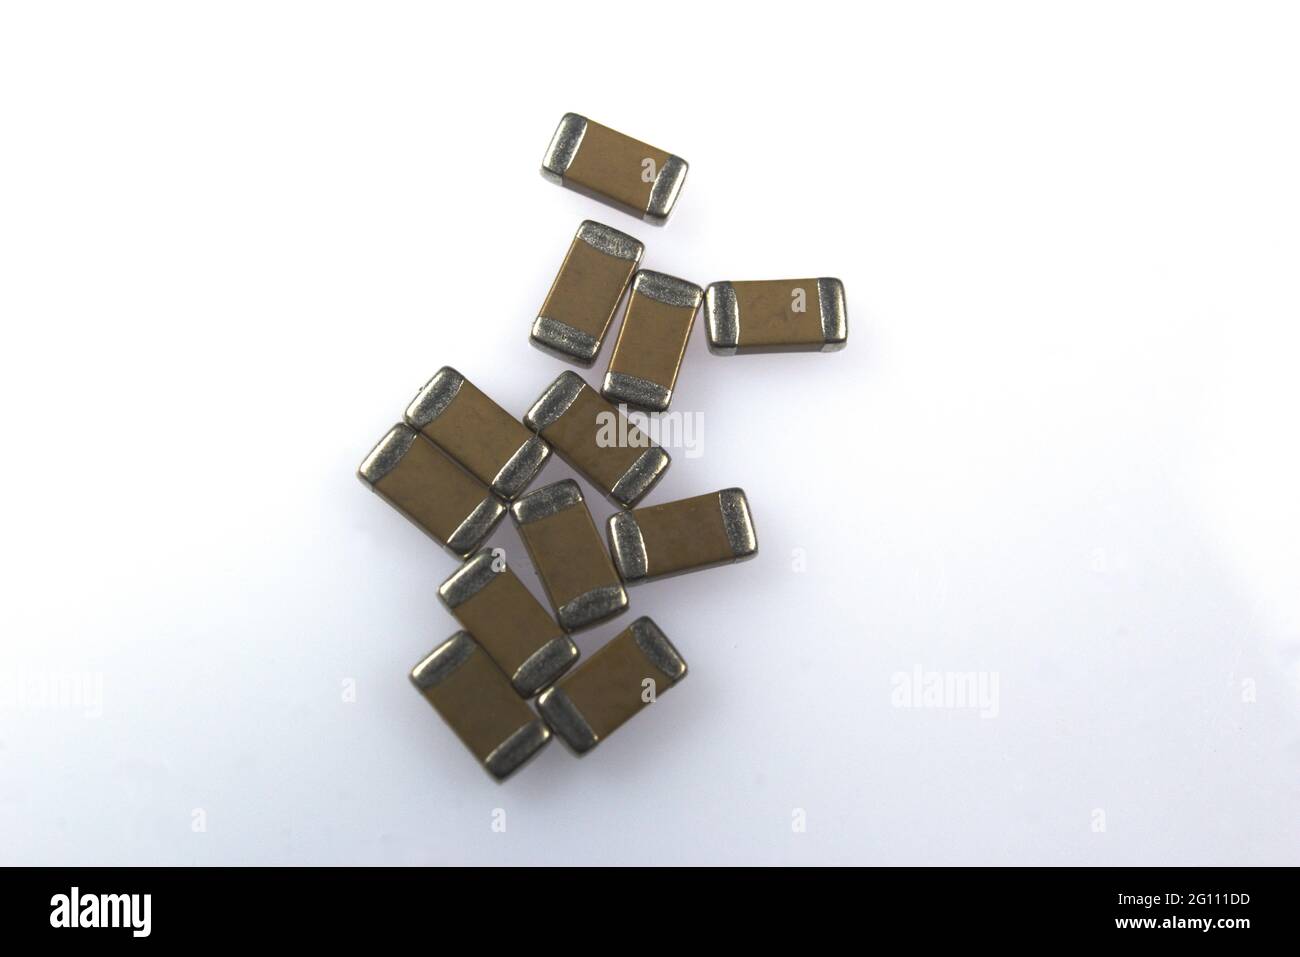 Electronic components:ceramic capacitors. Passive two-terminal electrical component that stores electrical energy. Stock Photo